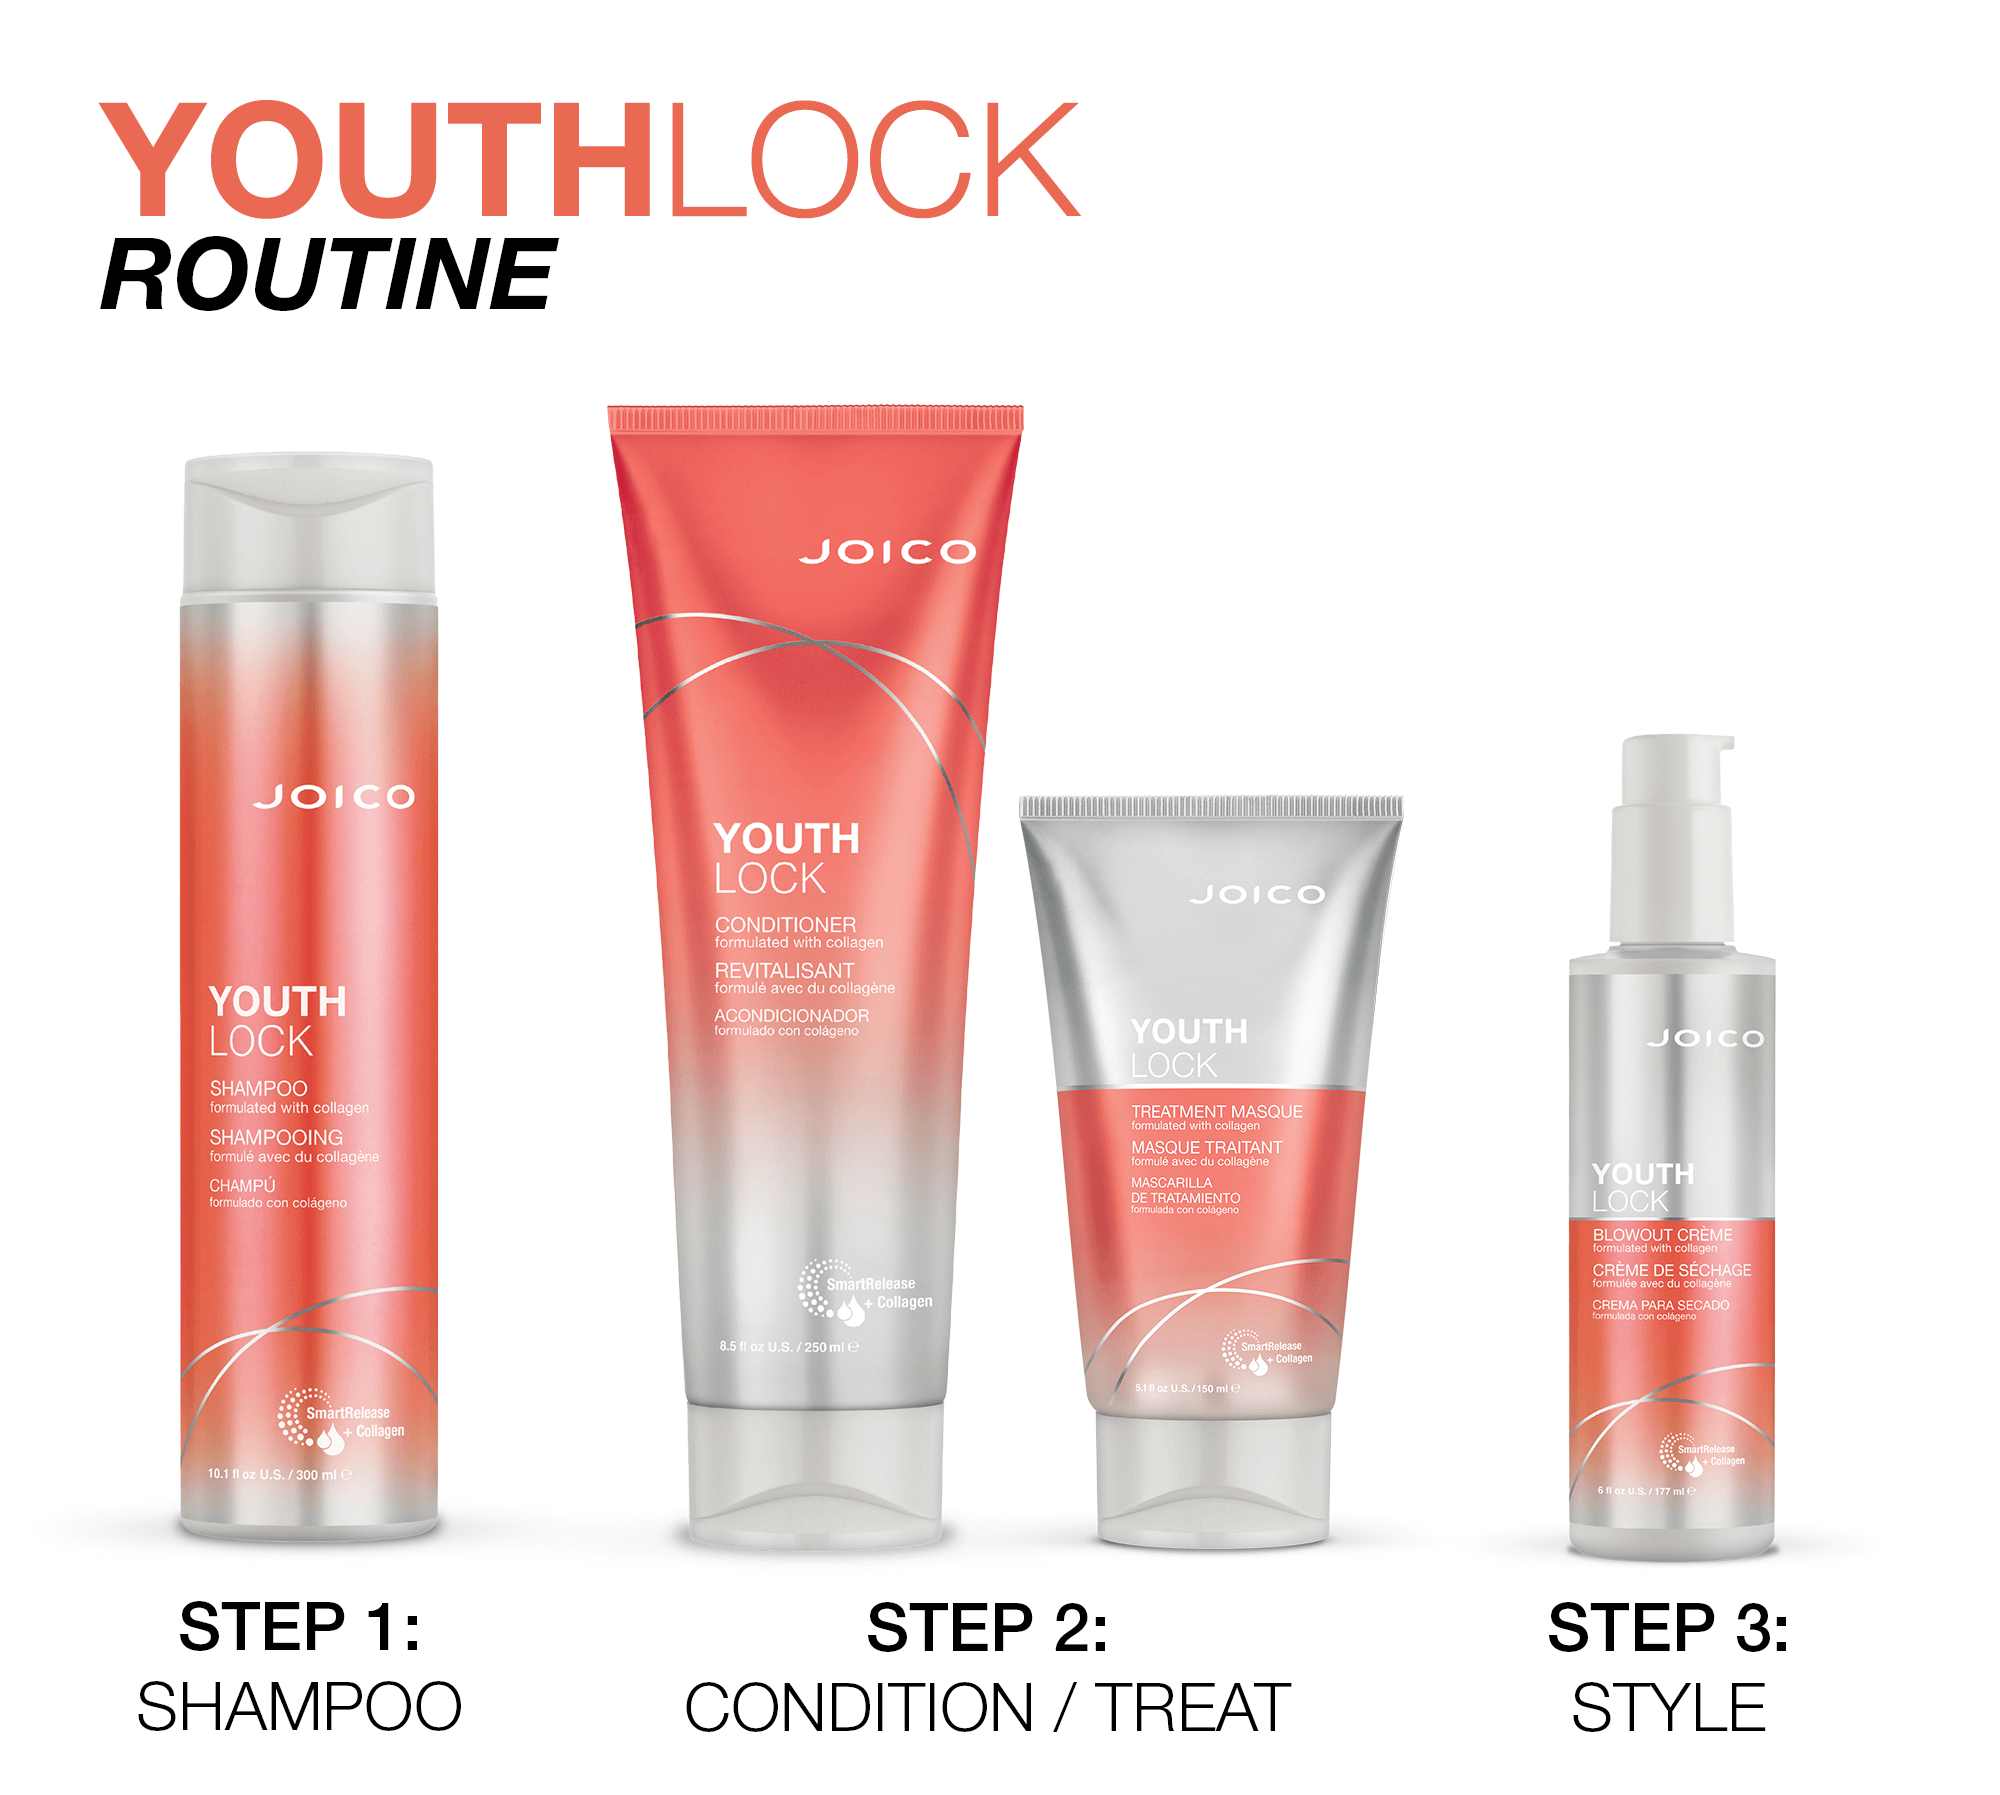 Youth Lock 3 step routine image